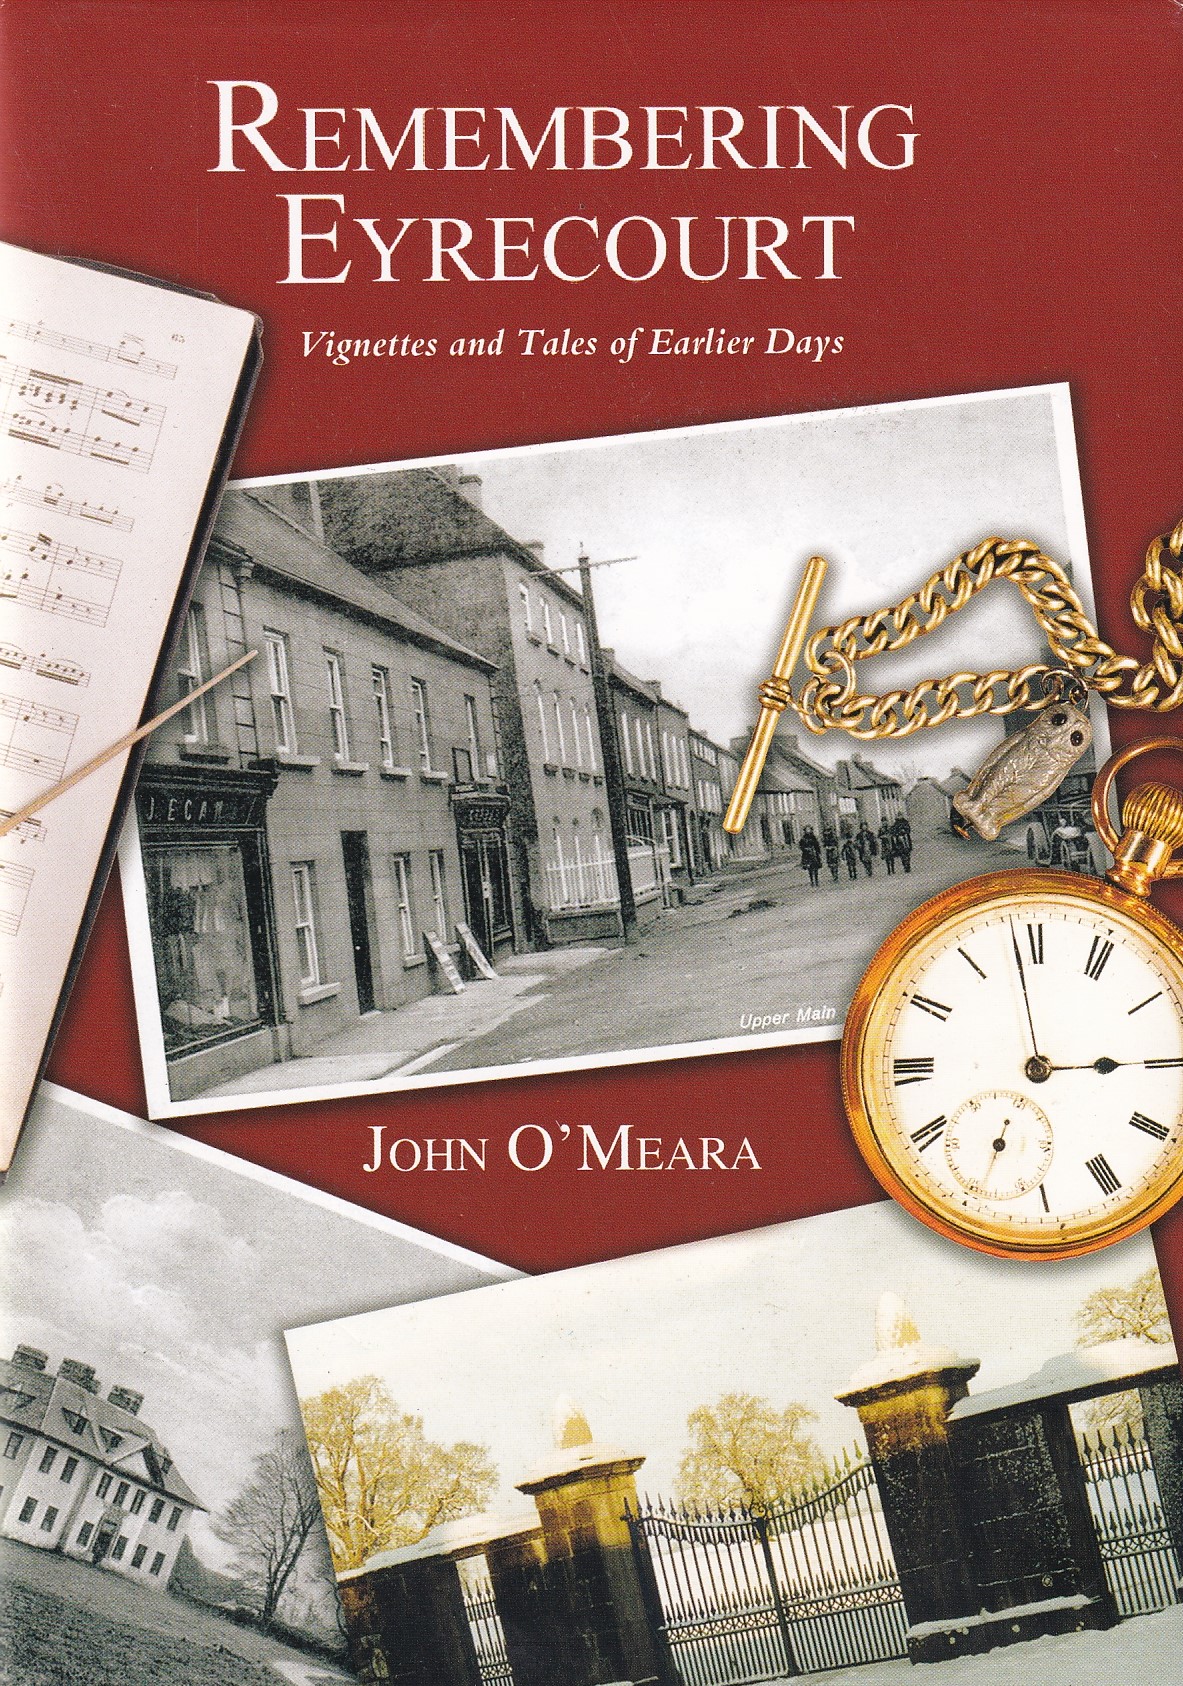 Remembering Eyrecourt: Vignettes and Tales of Earlier Days | John O'Meara | Charlie Byrne's